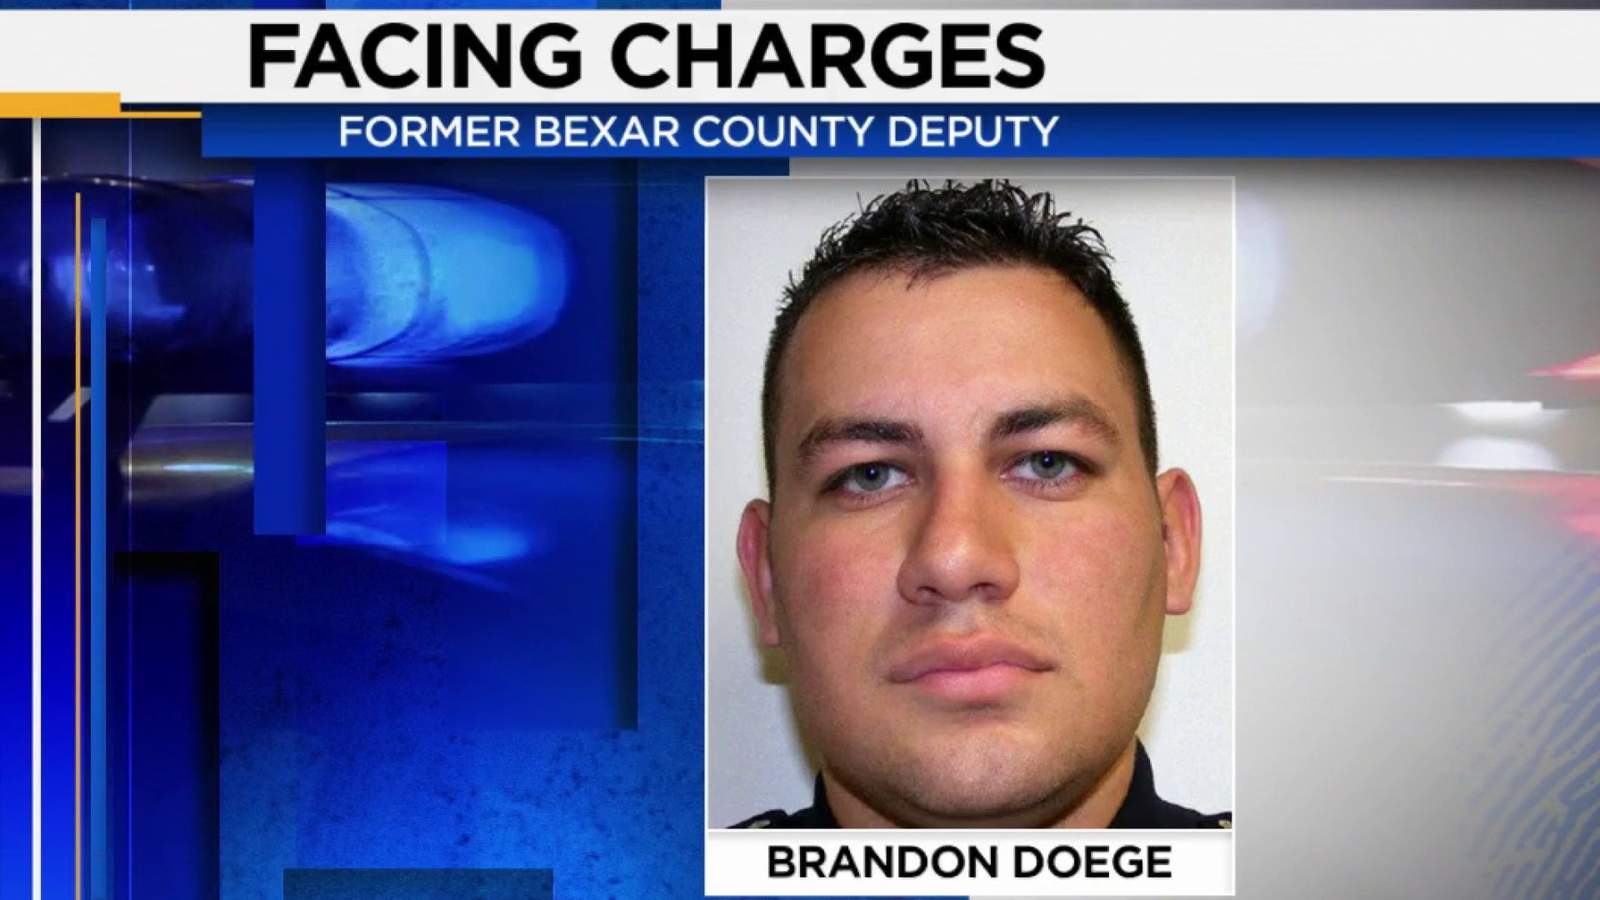 Former deputy faces three charges, Bexar County sheriff says